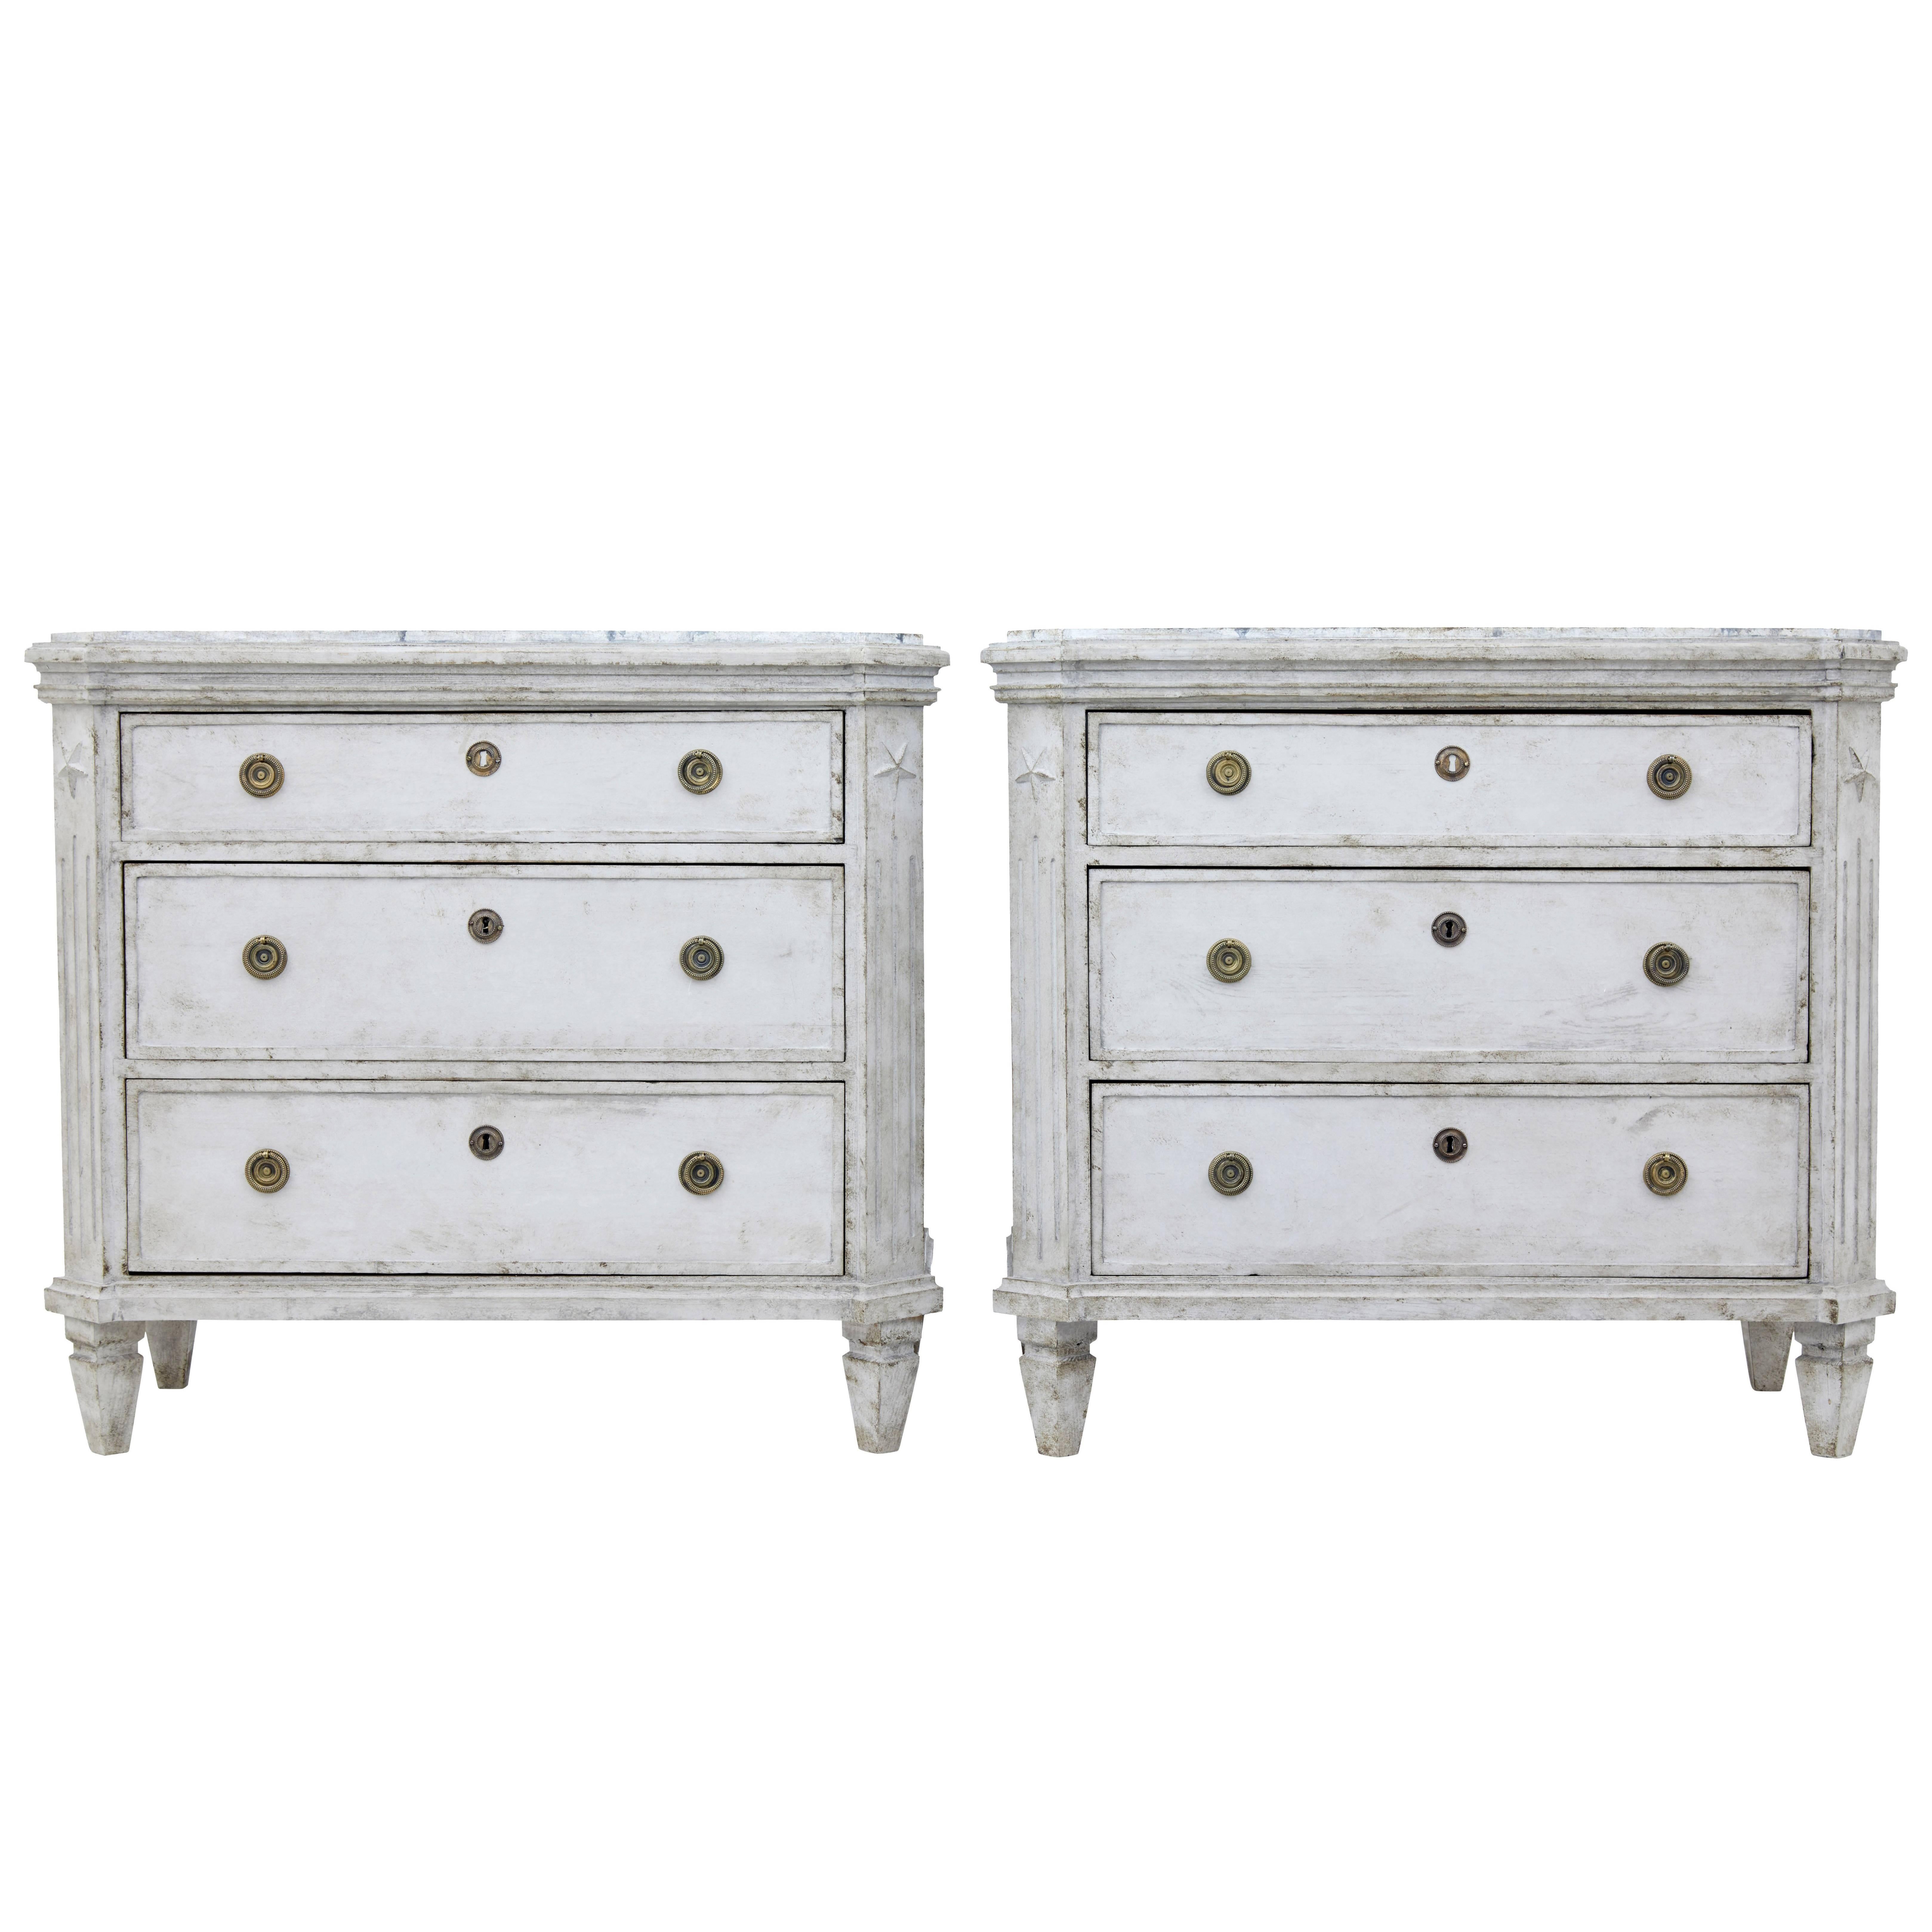 Pair of 19th Century Swedish Commodes with Faux Marble Tops